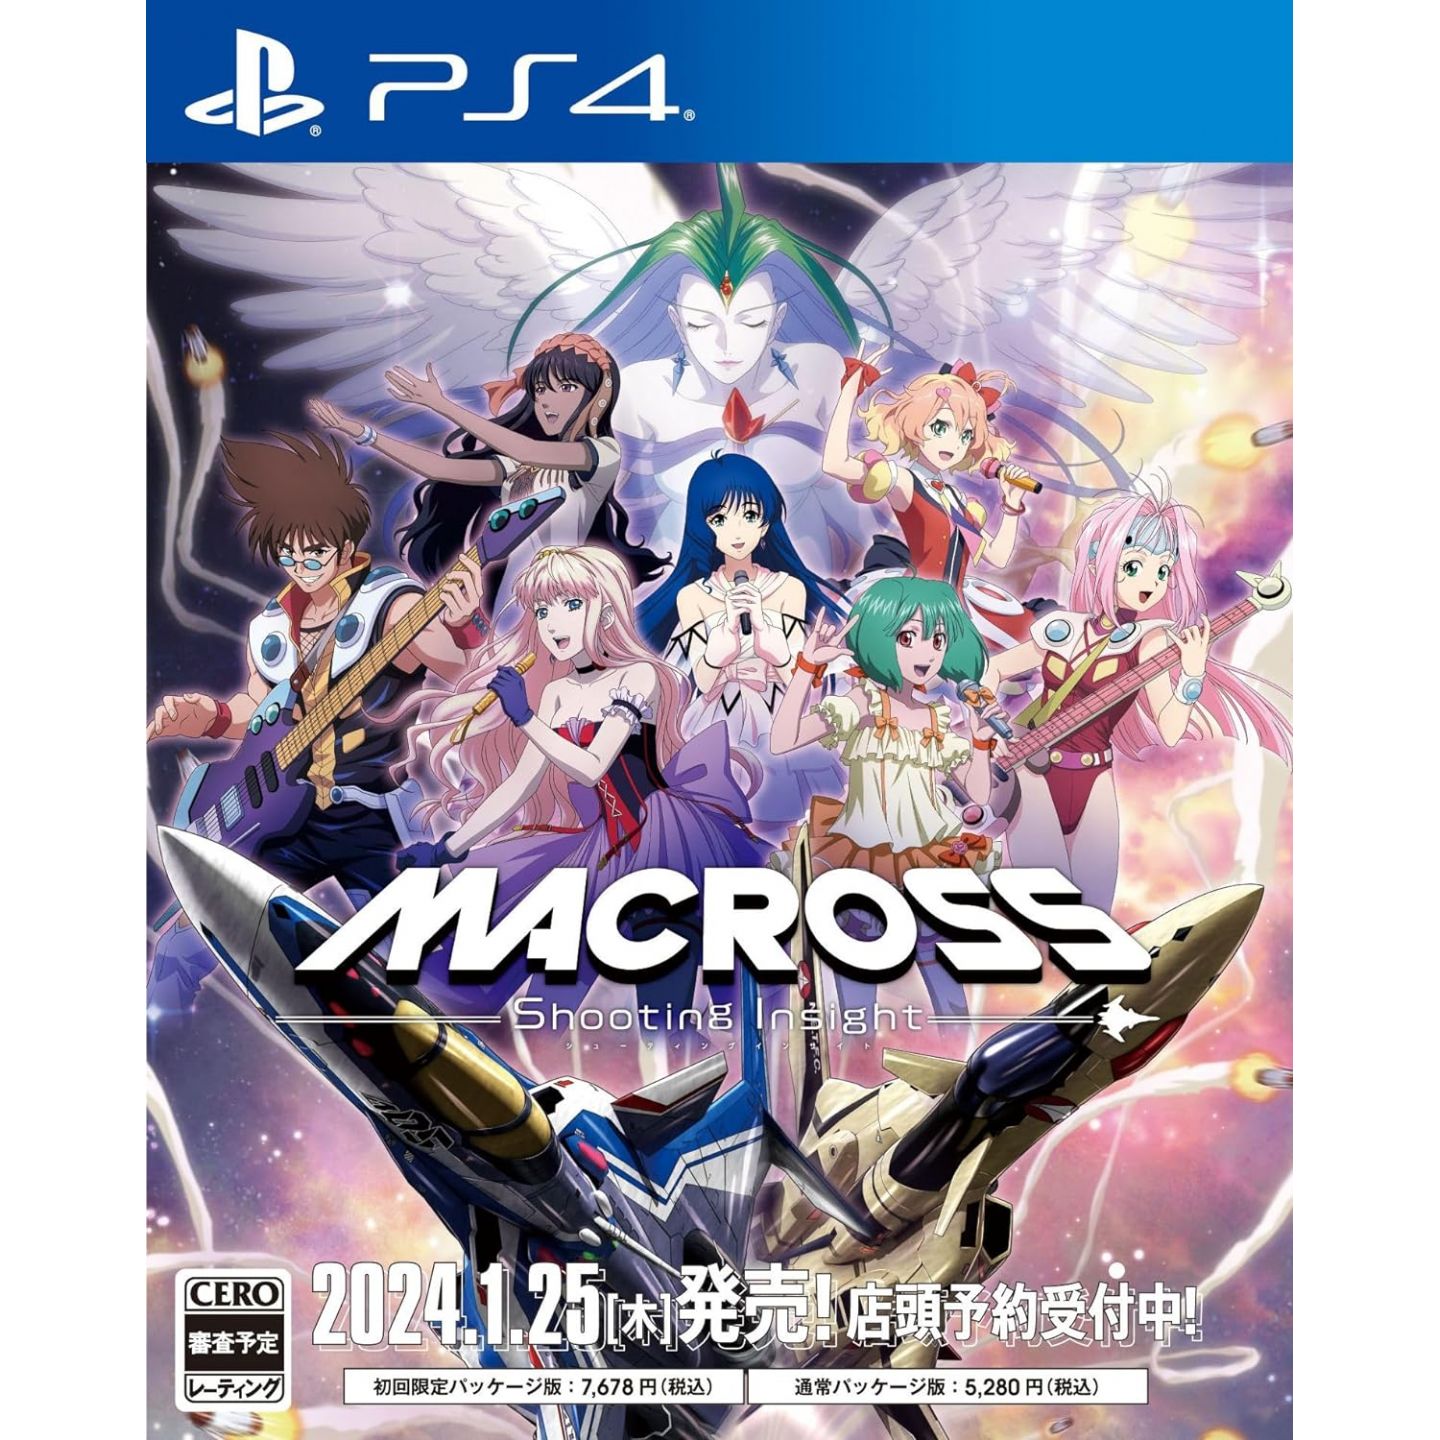 Macross: Shooting Insight Limited Edition | Sony Playstation 4 